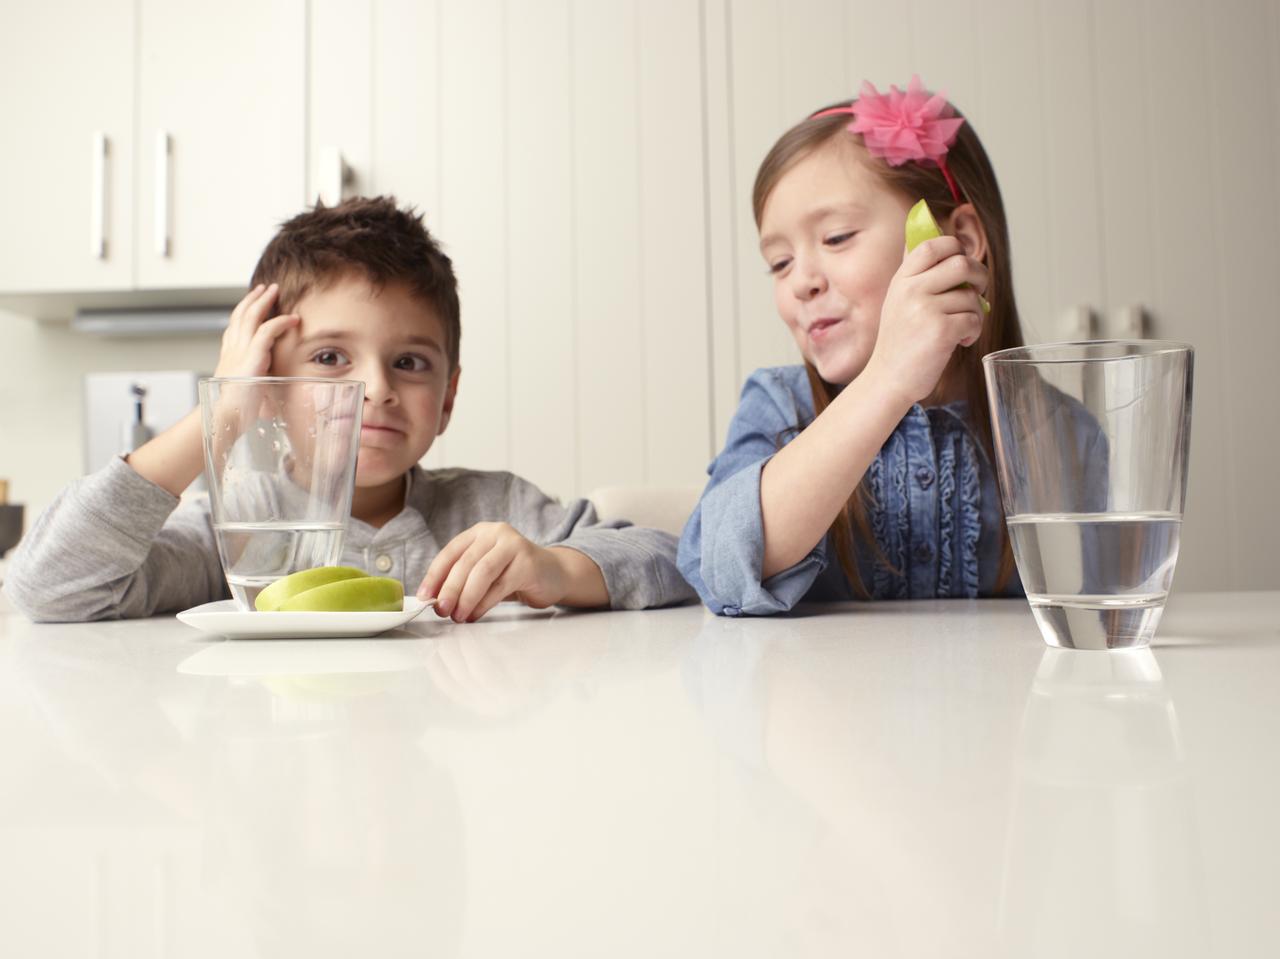 Boy and girl sit at a table with apple slices and water